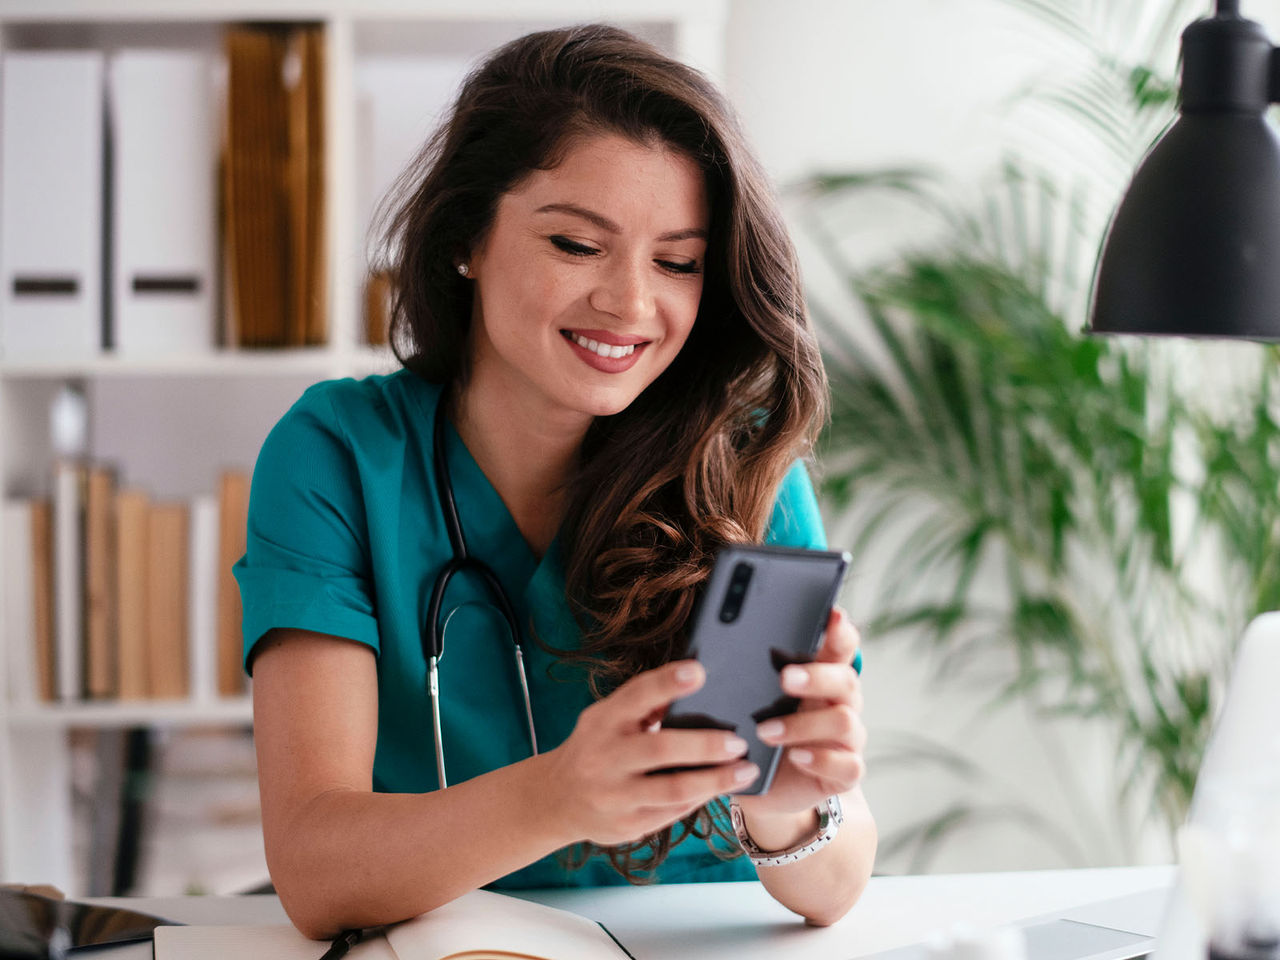 Healthcare professional using a cellphone.